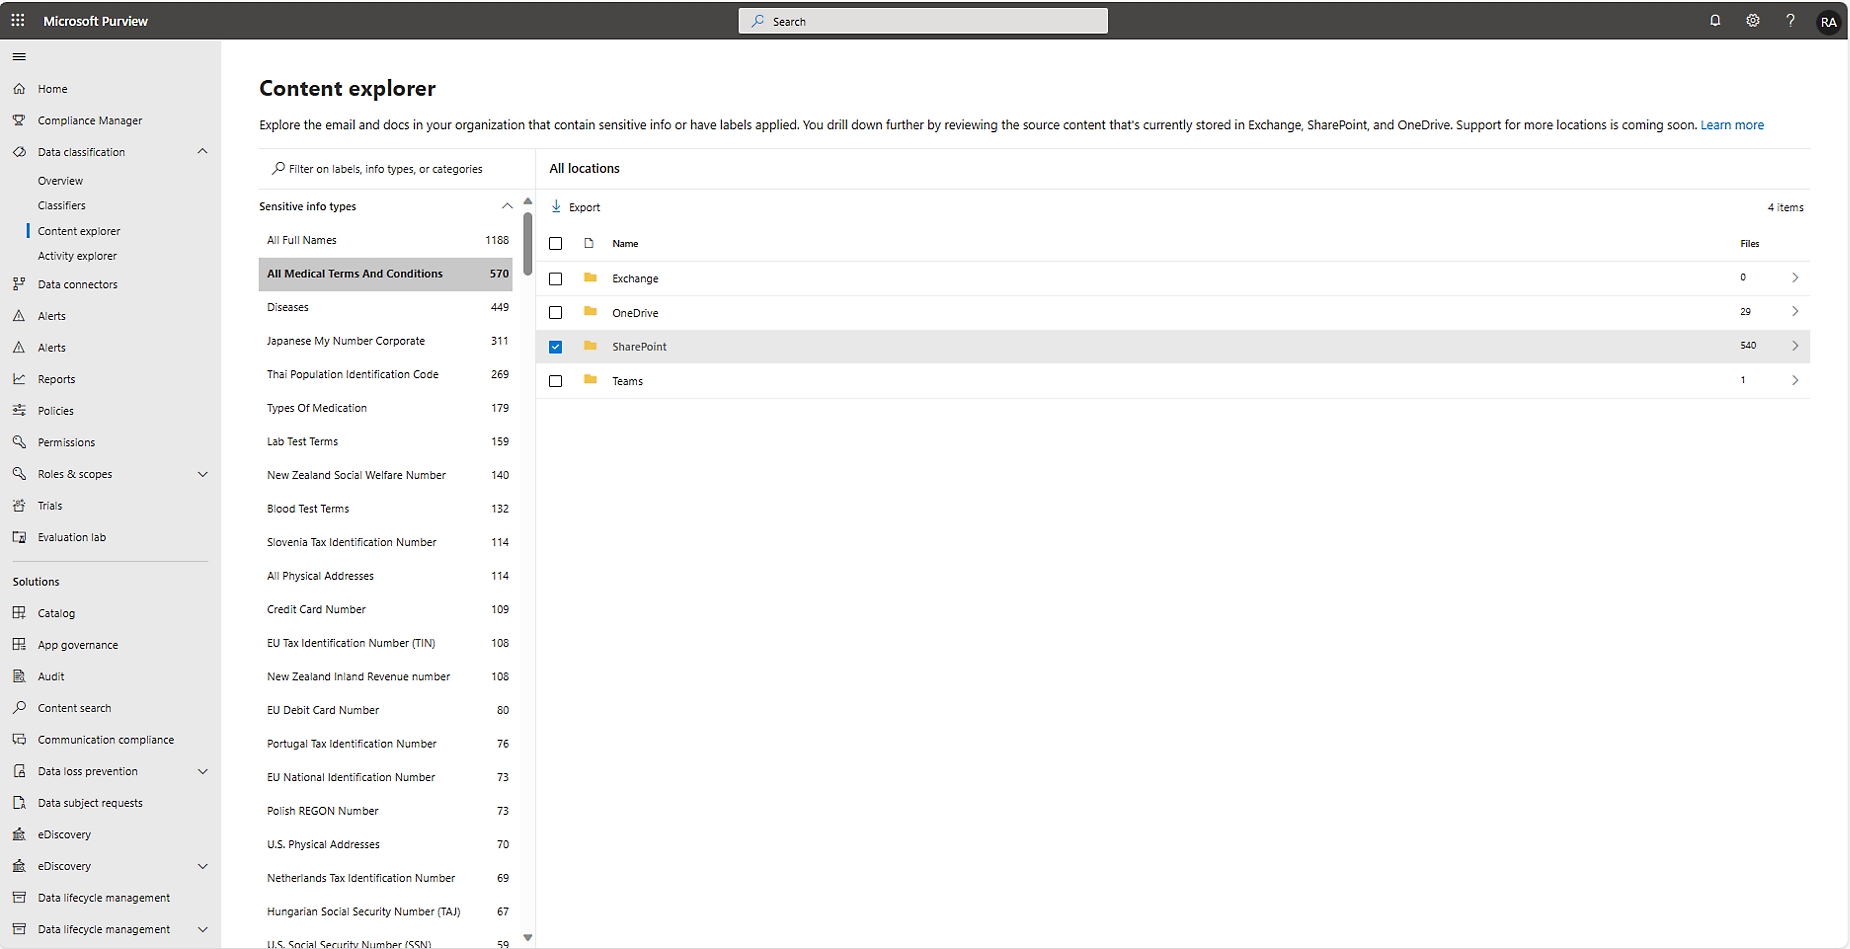 Microsoft purview content explorer interface showing filtered results for sensitive information in various documents